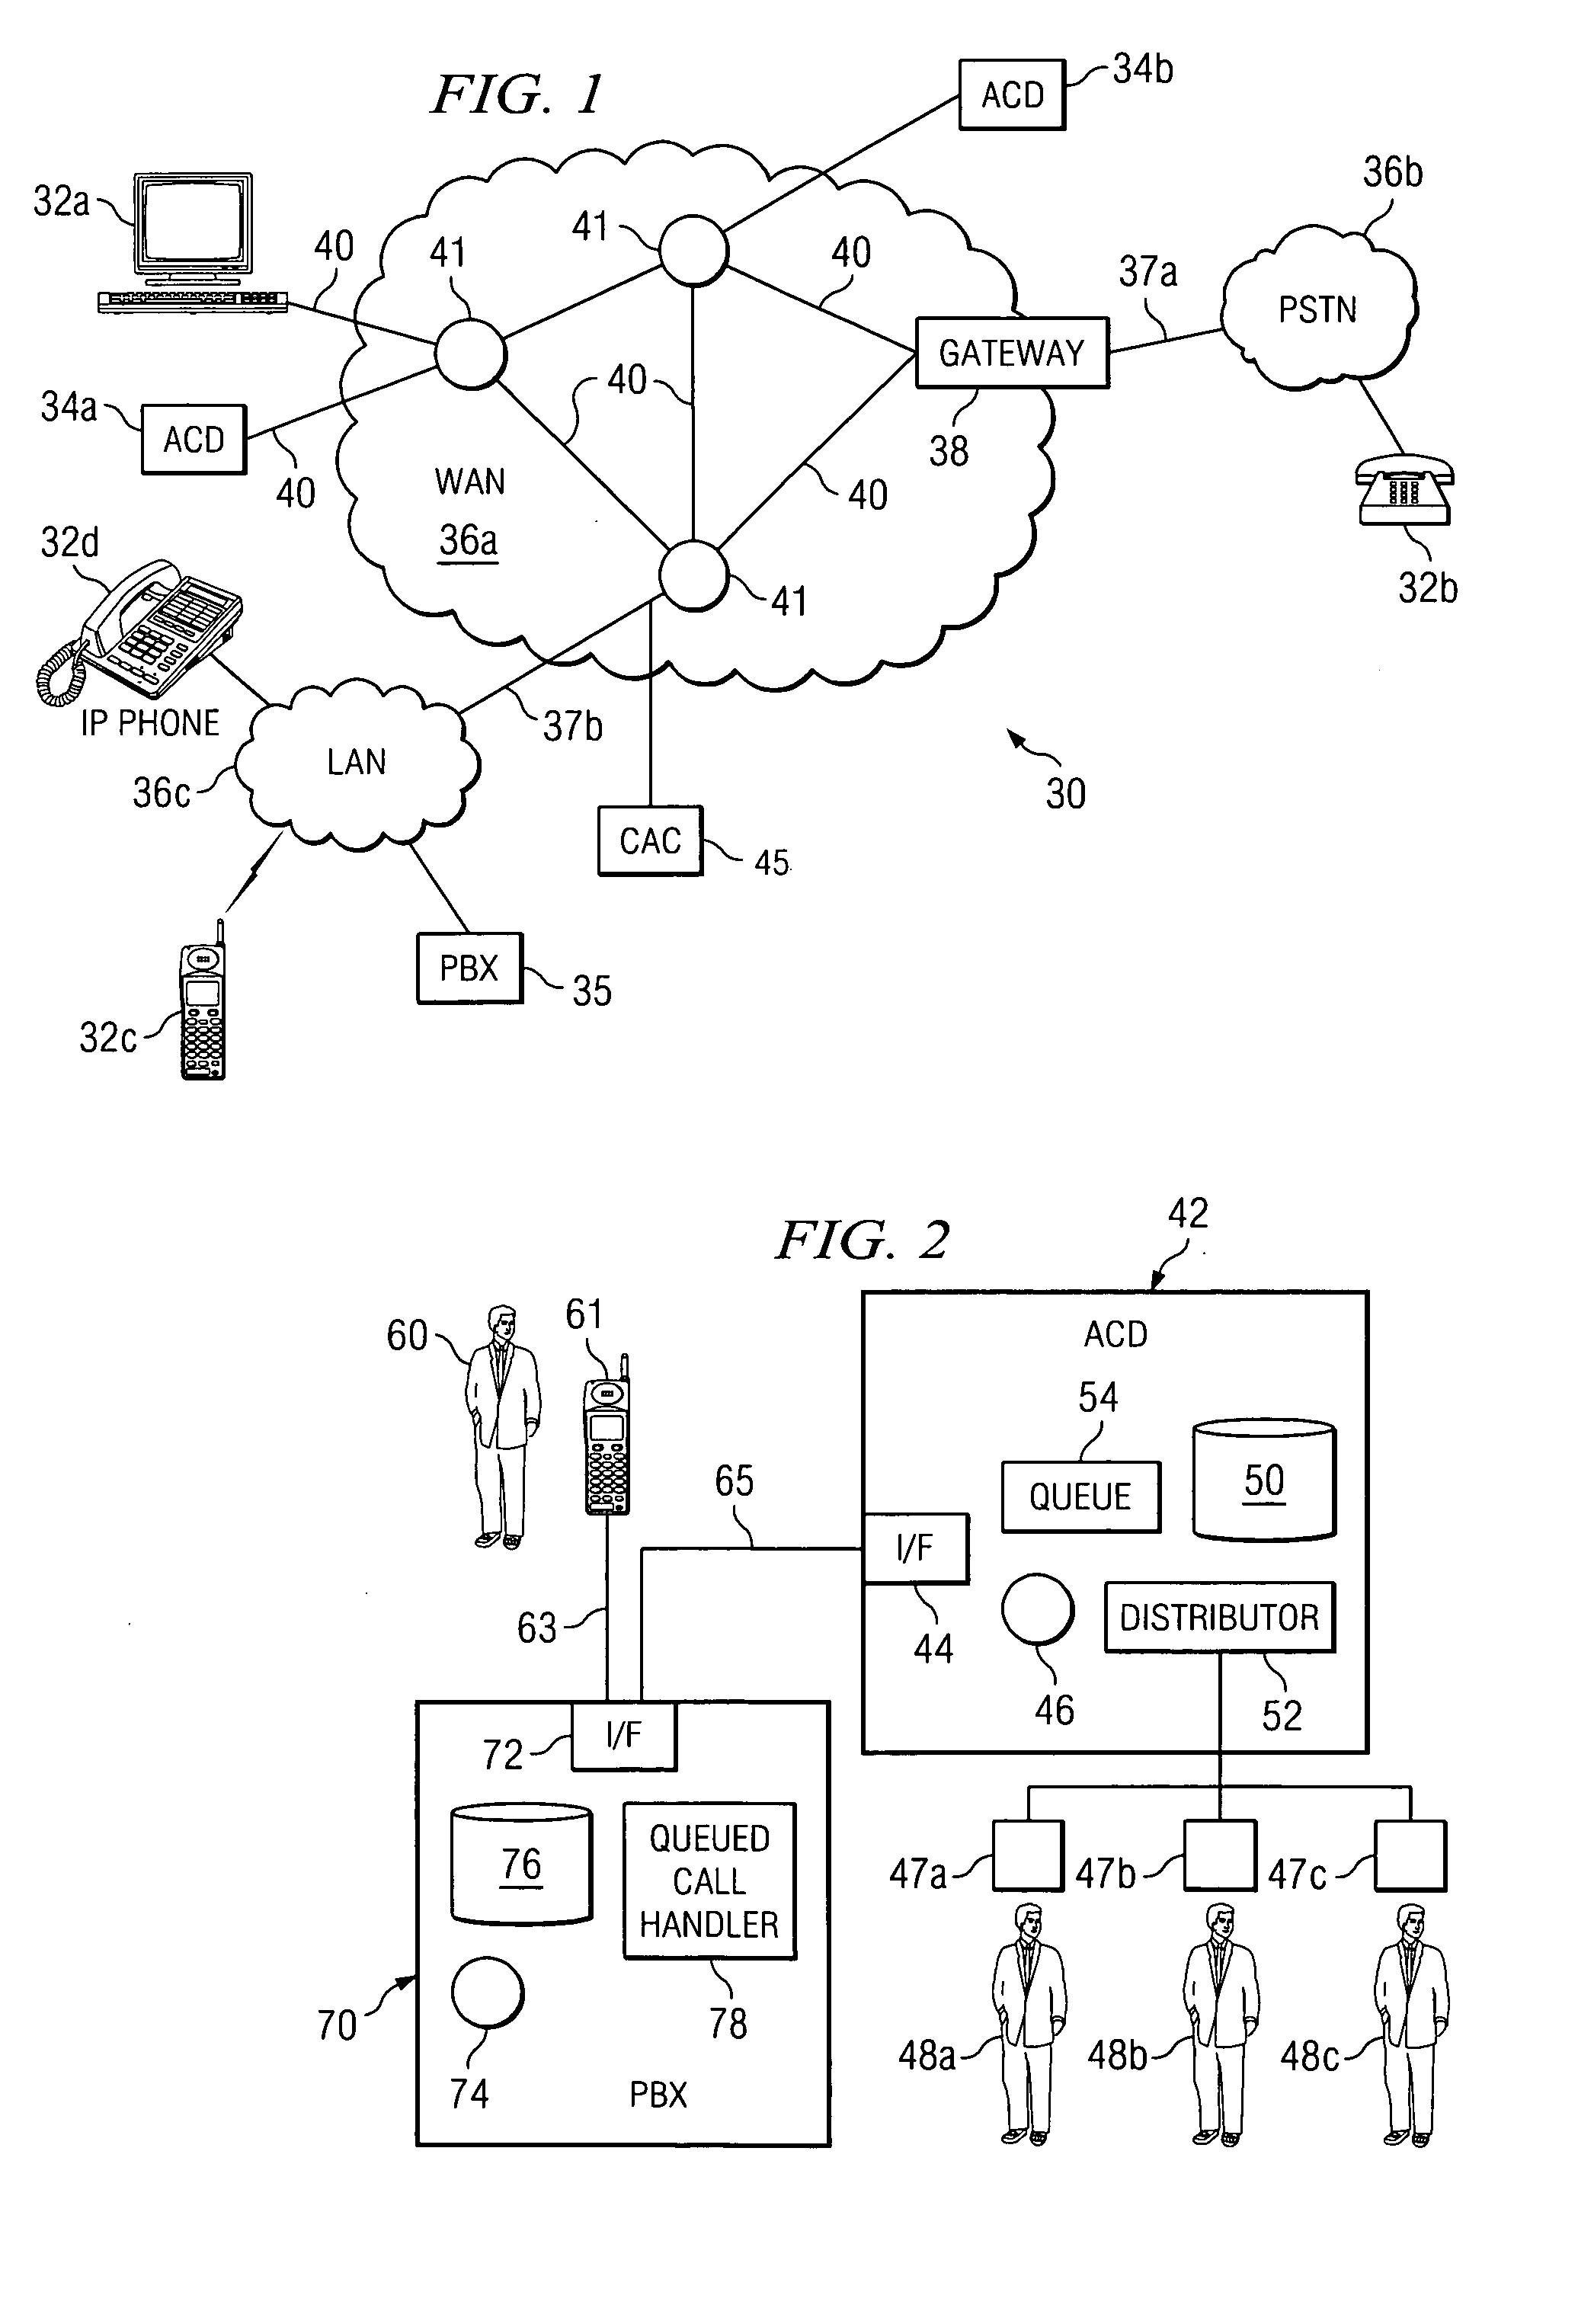 Method and system for handling a queued automatic call distributor call